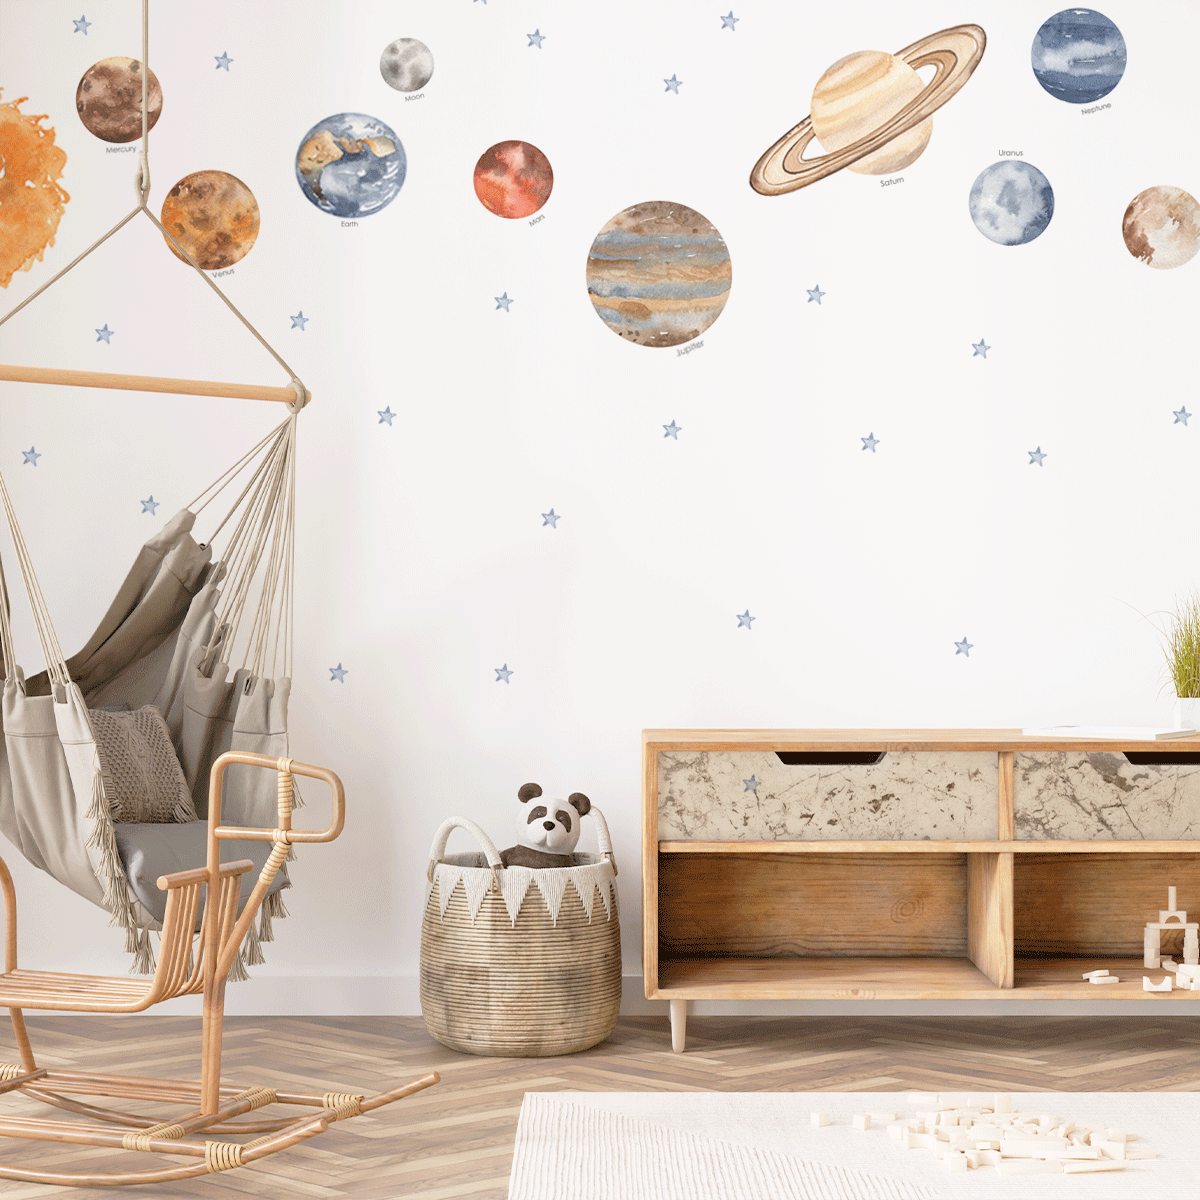 Space wall sticker - Space adventure - Solar system with planets